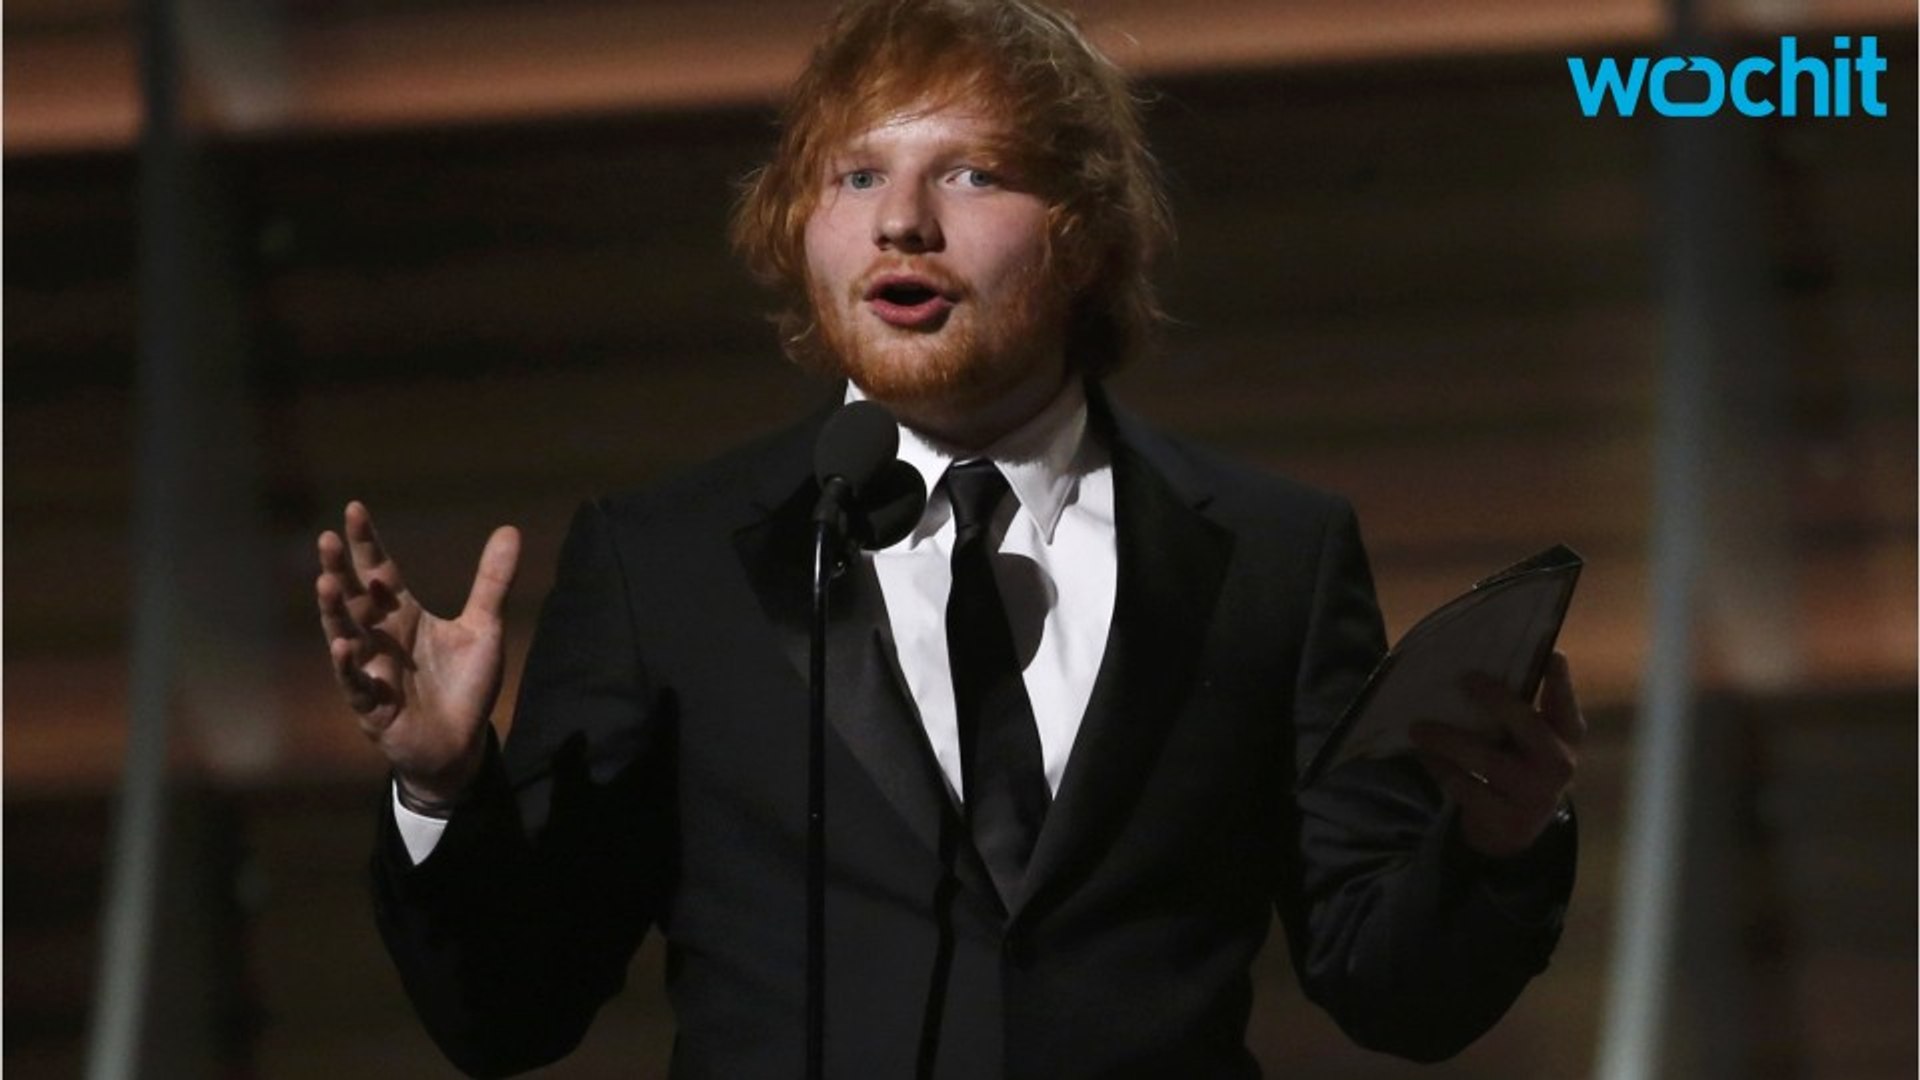 Did Ed Sheeran Steal Part Of The Song 'Photograph'?